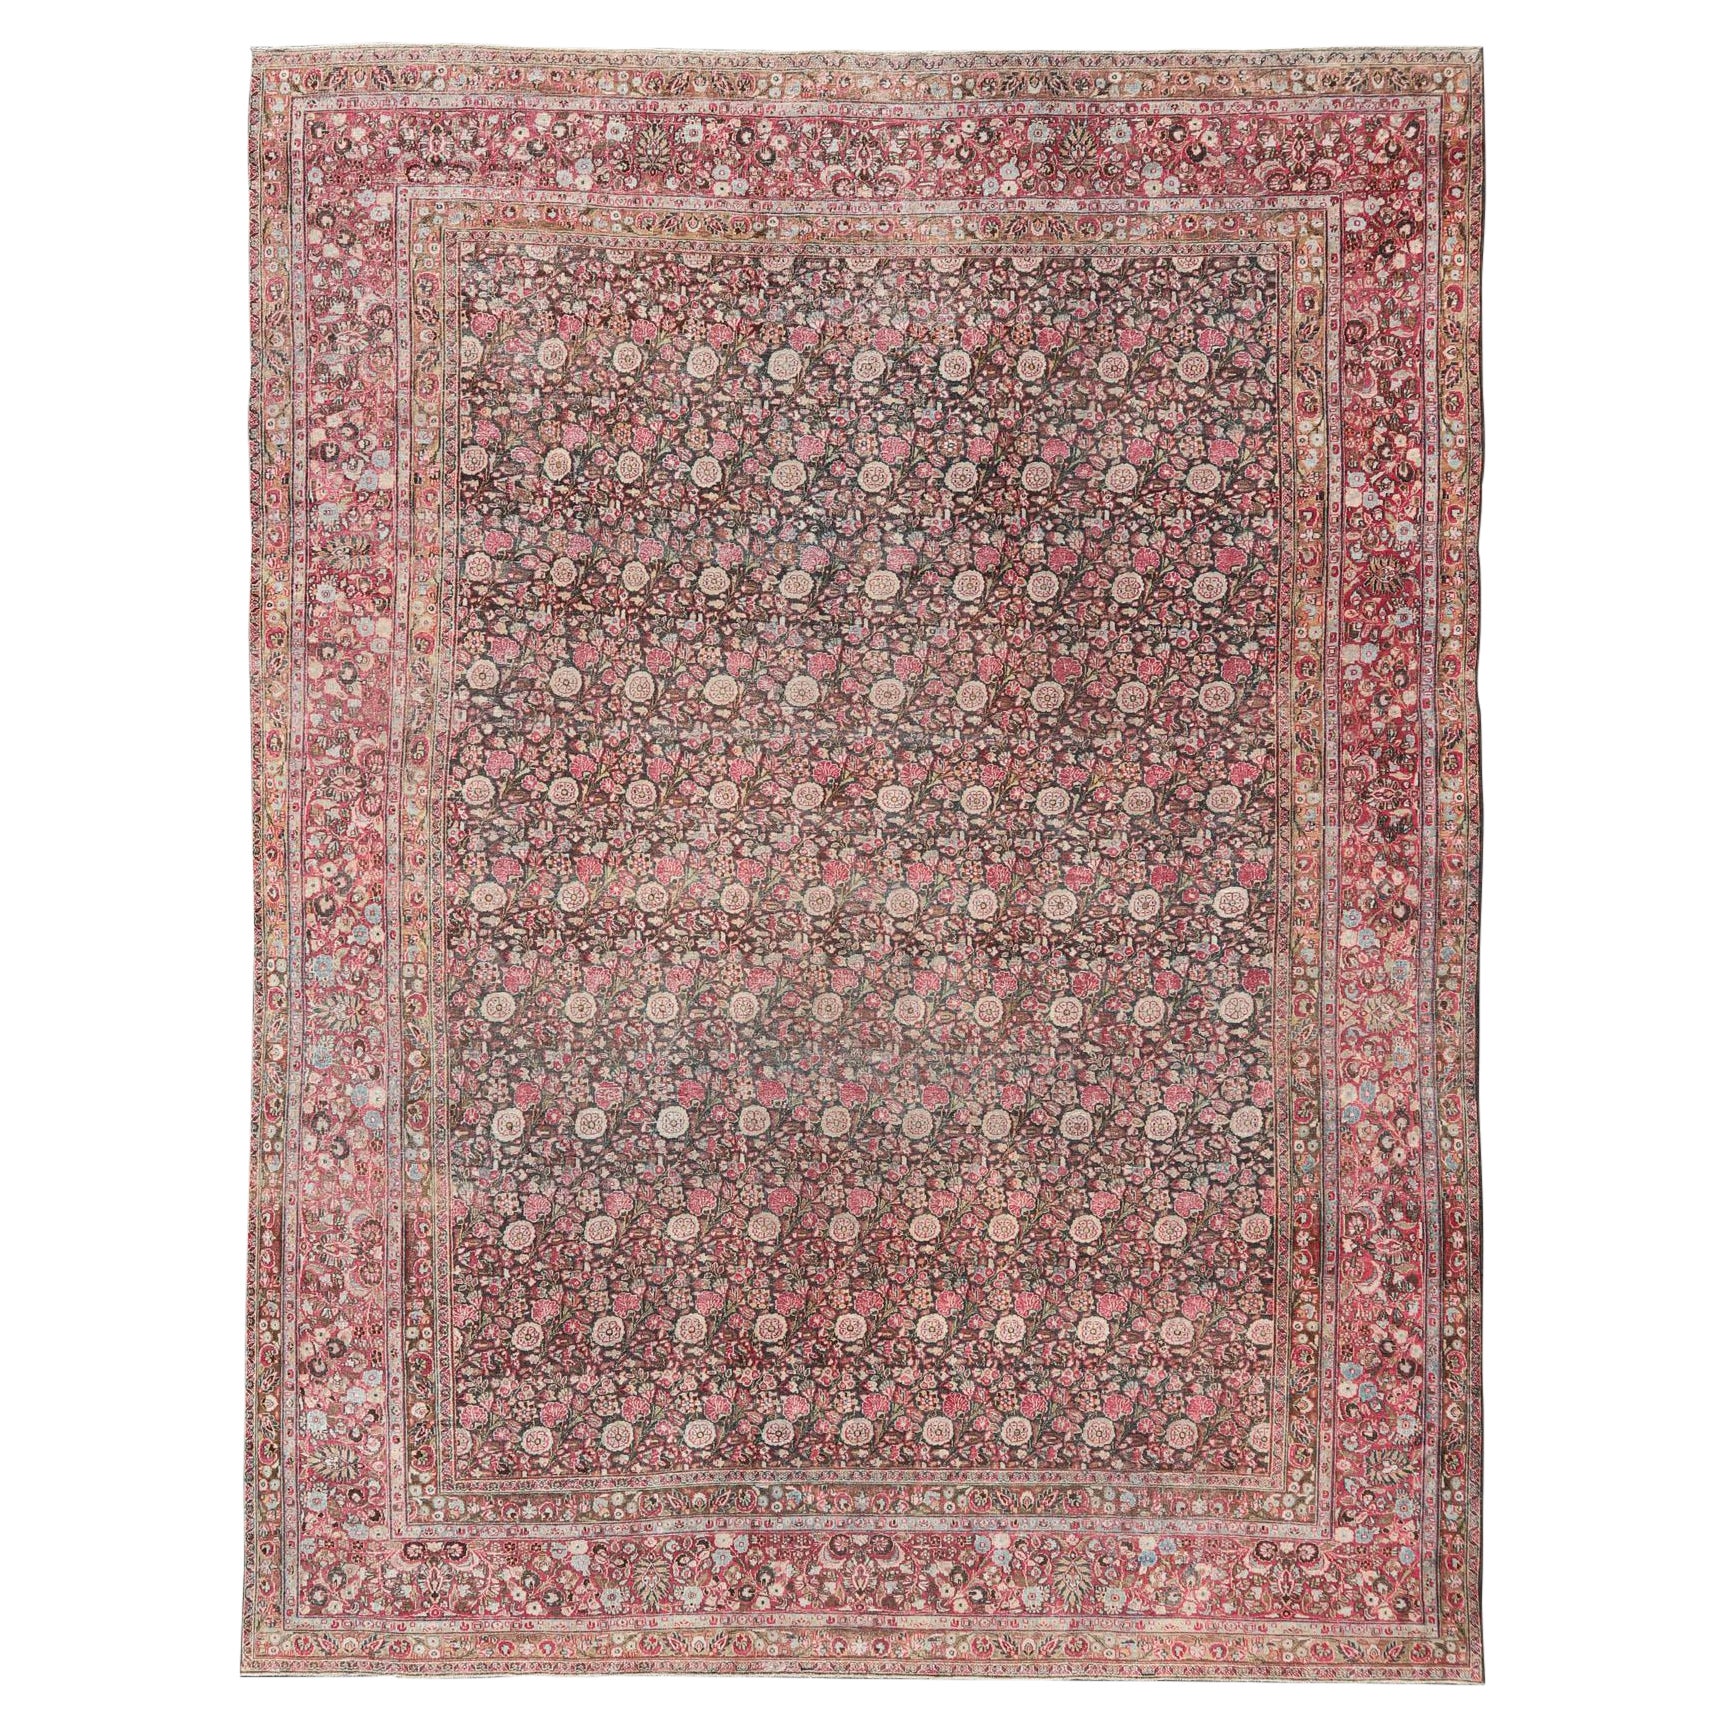 Antique Persian Khorasan Rug with Floral Design in Charcoal, Brown & Rose Red For Sale